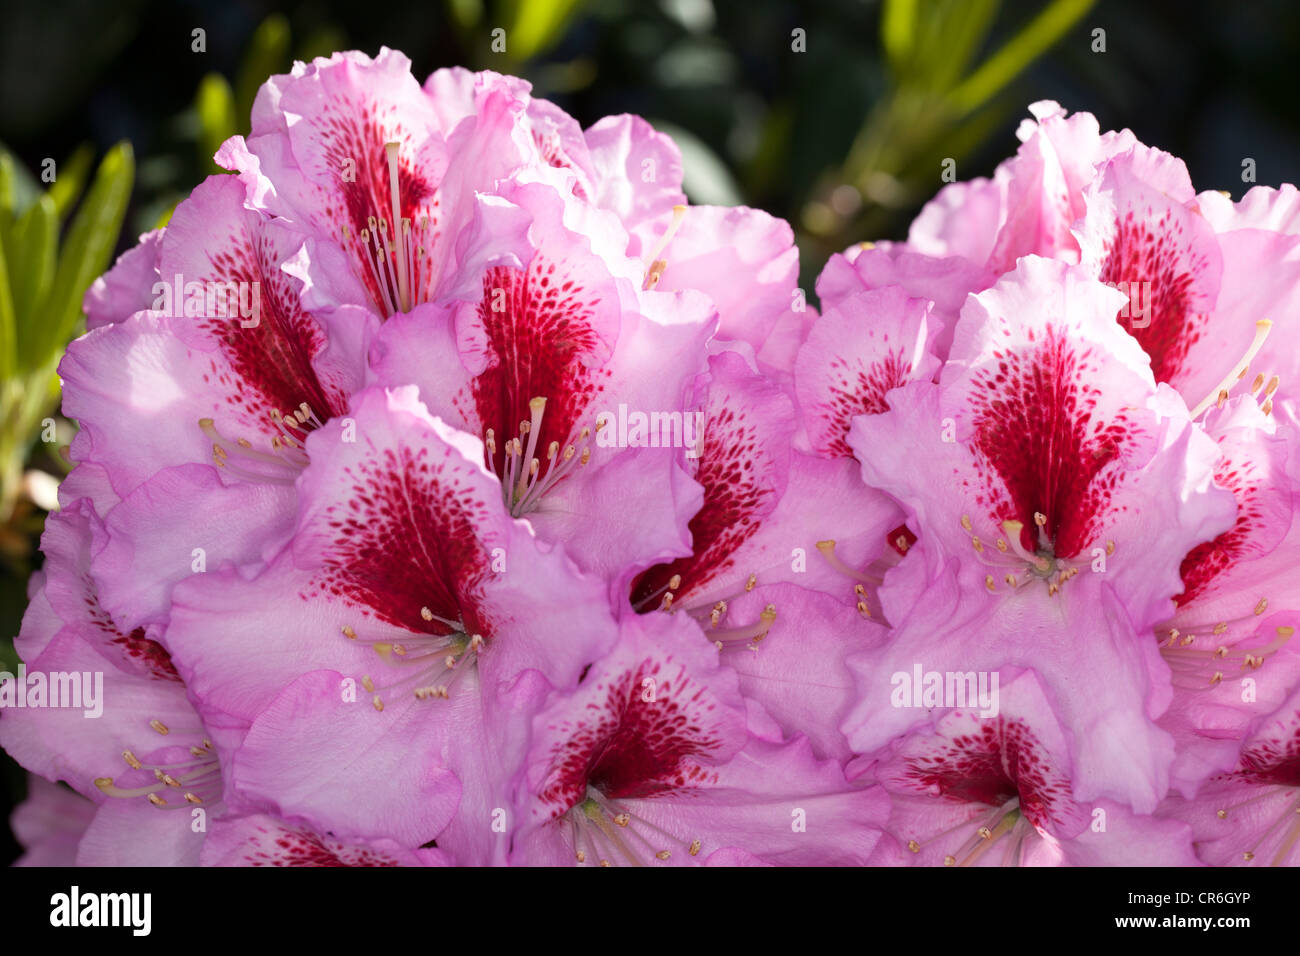 'Diadem' Rhododendron, Parkrhododendron (Diadem) Stock Photo